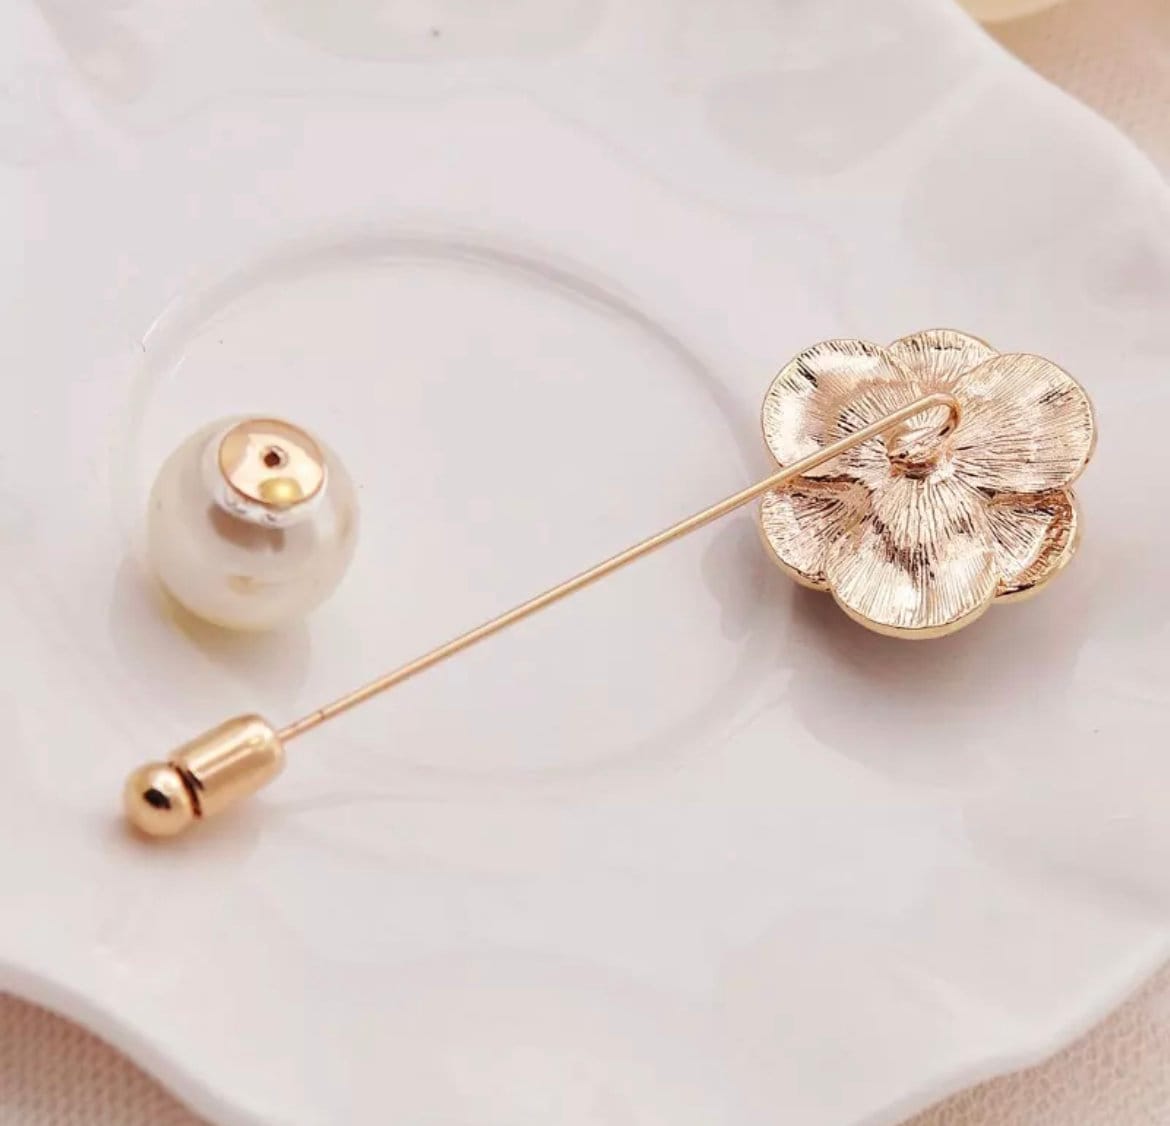 Luxury White Camellia Flower Brooches For Women-Elegant Black Camellia Flower Pearl Pin Brooches-Rose Flower Brooches-Vintage Pearl Brooches